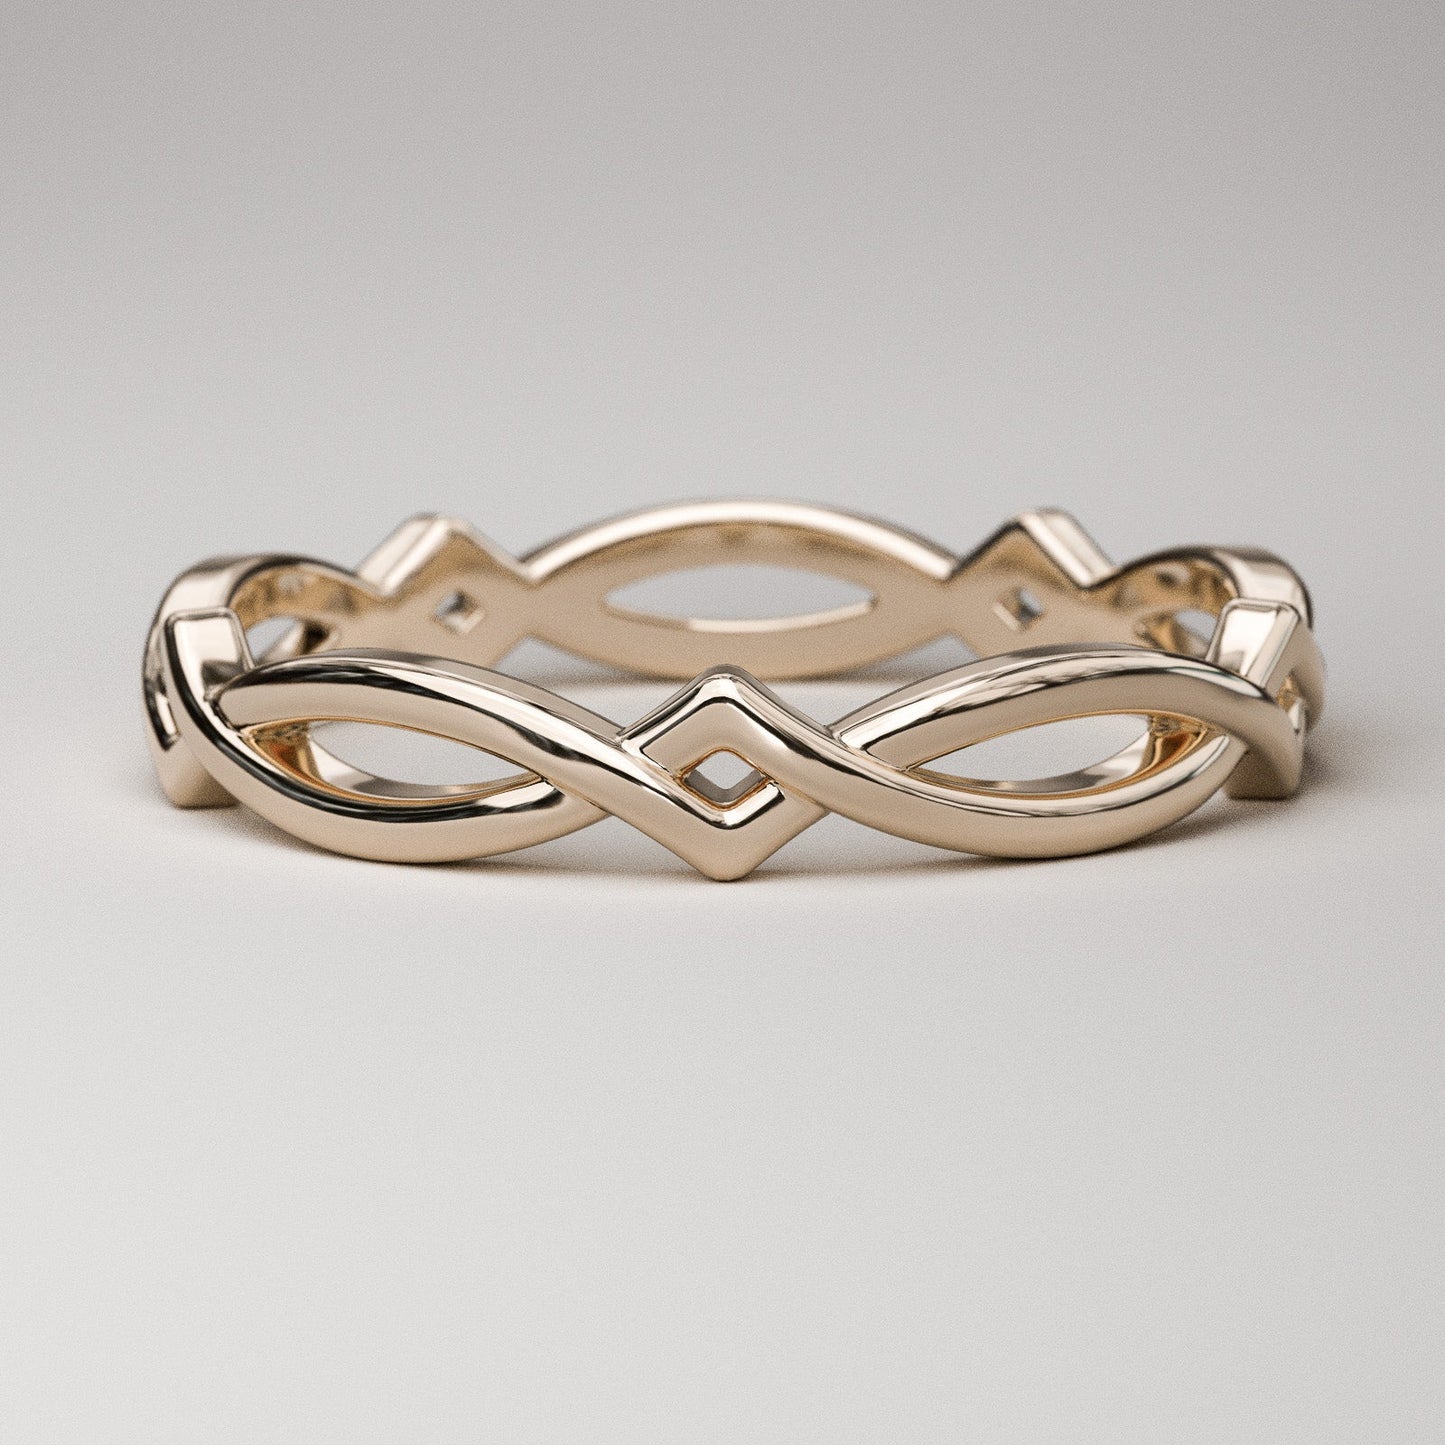 Rose gold womens wedding band - A simple Celtic design